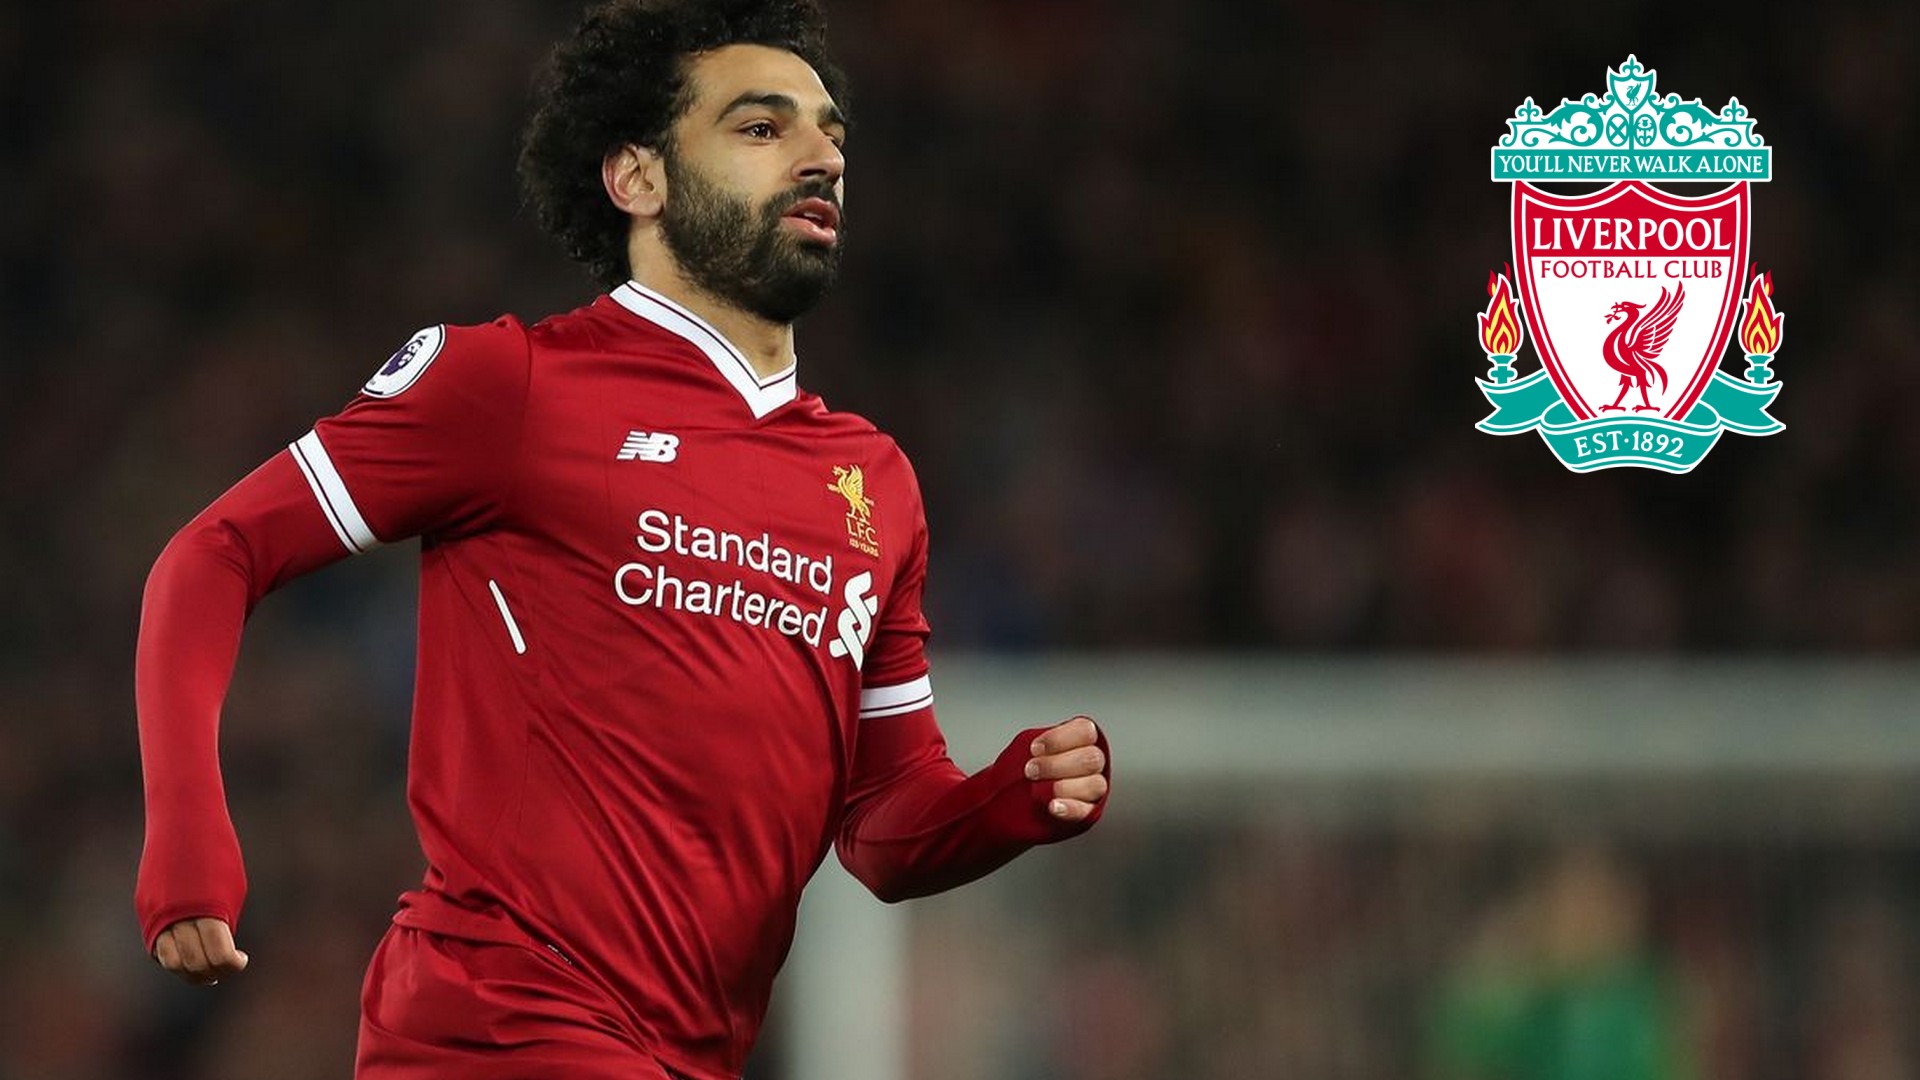 Wallpaper Mohamed Salah with resolution 1920X1080 pixel. You can use this wallpaper as background for your desktop Computer Screensavers, Android or iPhone smartphones